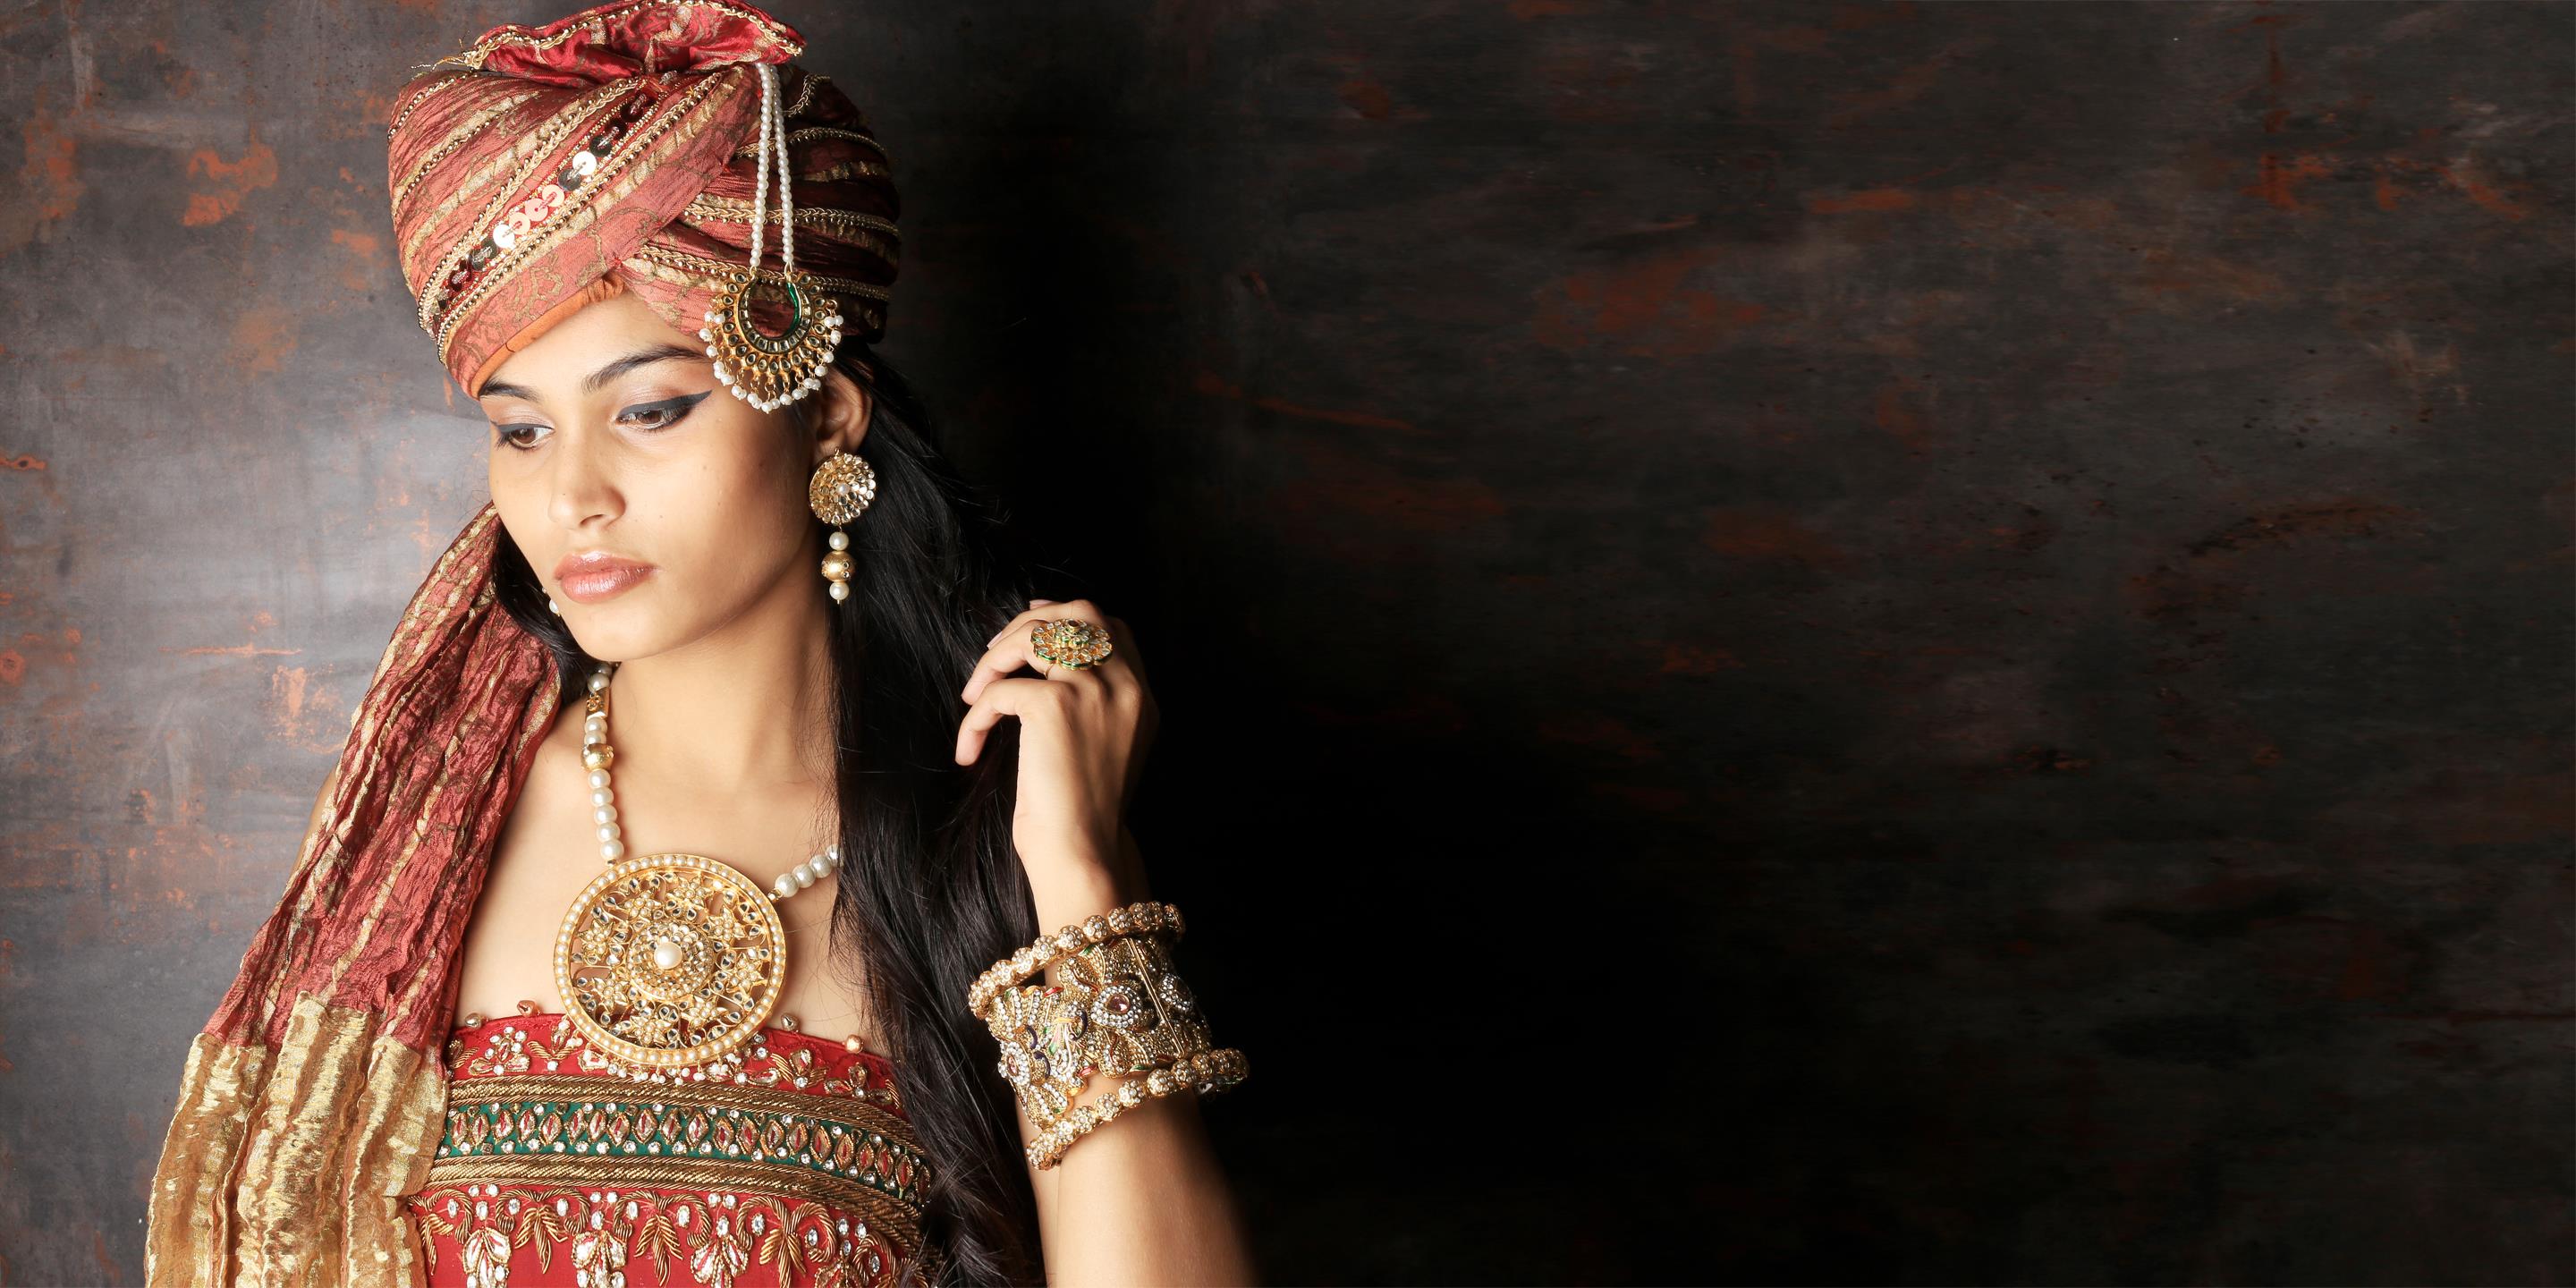  Indian Wedding Site Relaunch Celebration Sweepstakes: India Trend